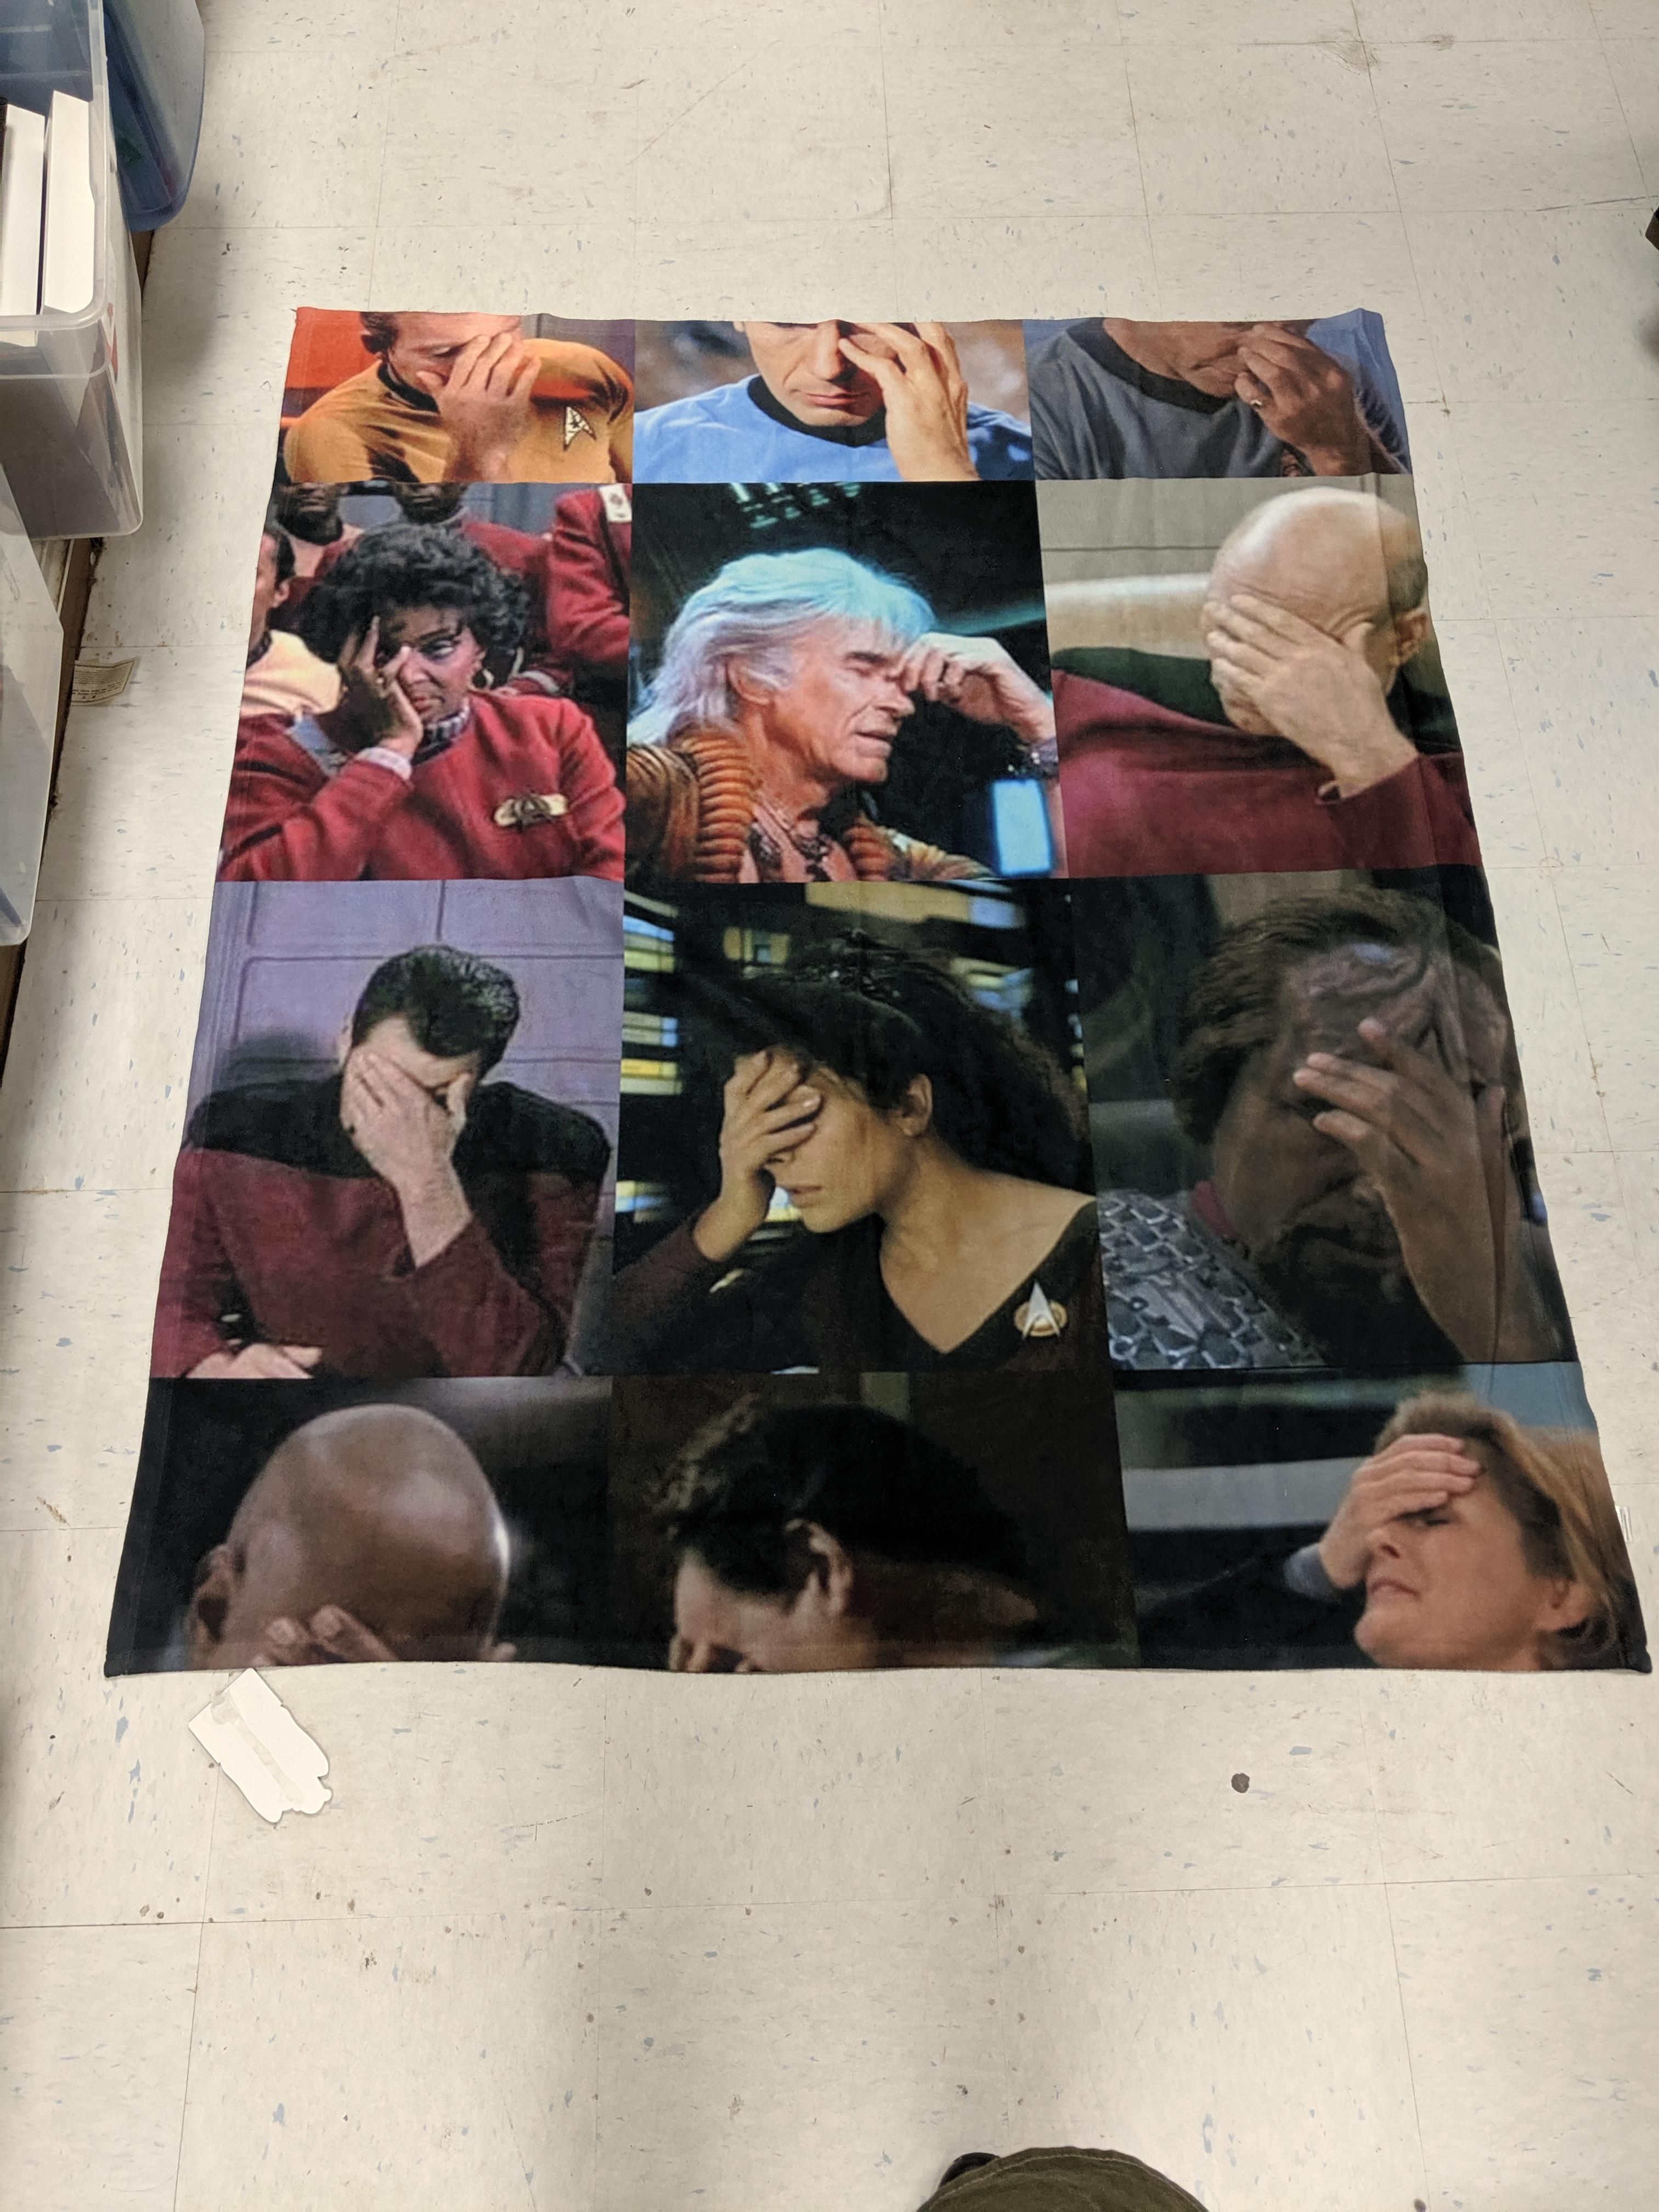 Found the perfect blanket at a thrift store today